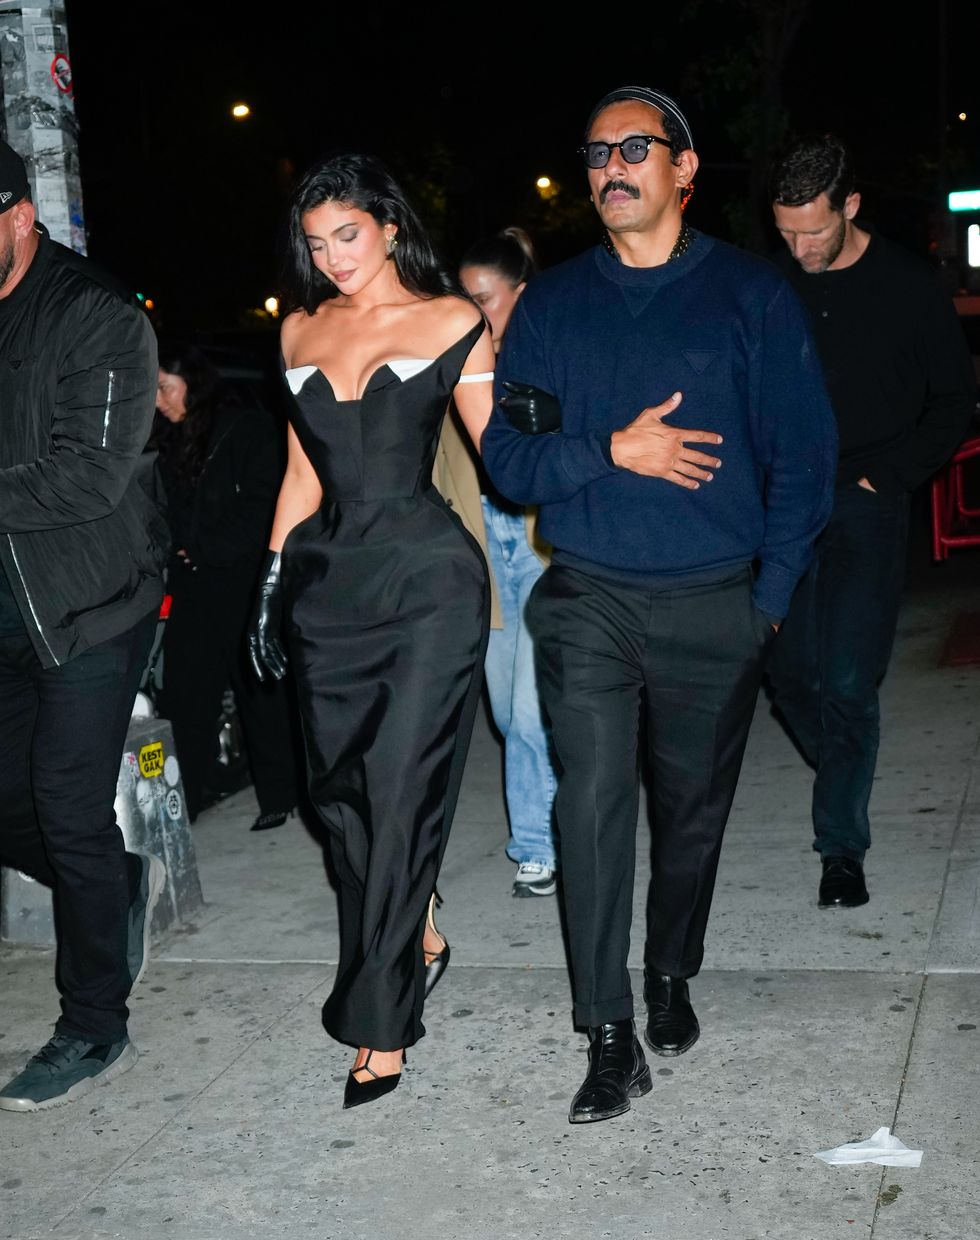 Kylie Jenner Wore Corseted Jean Paul Gaultier Dress to Met Gala ...